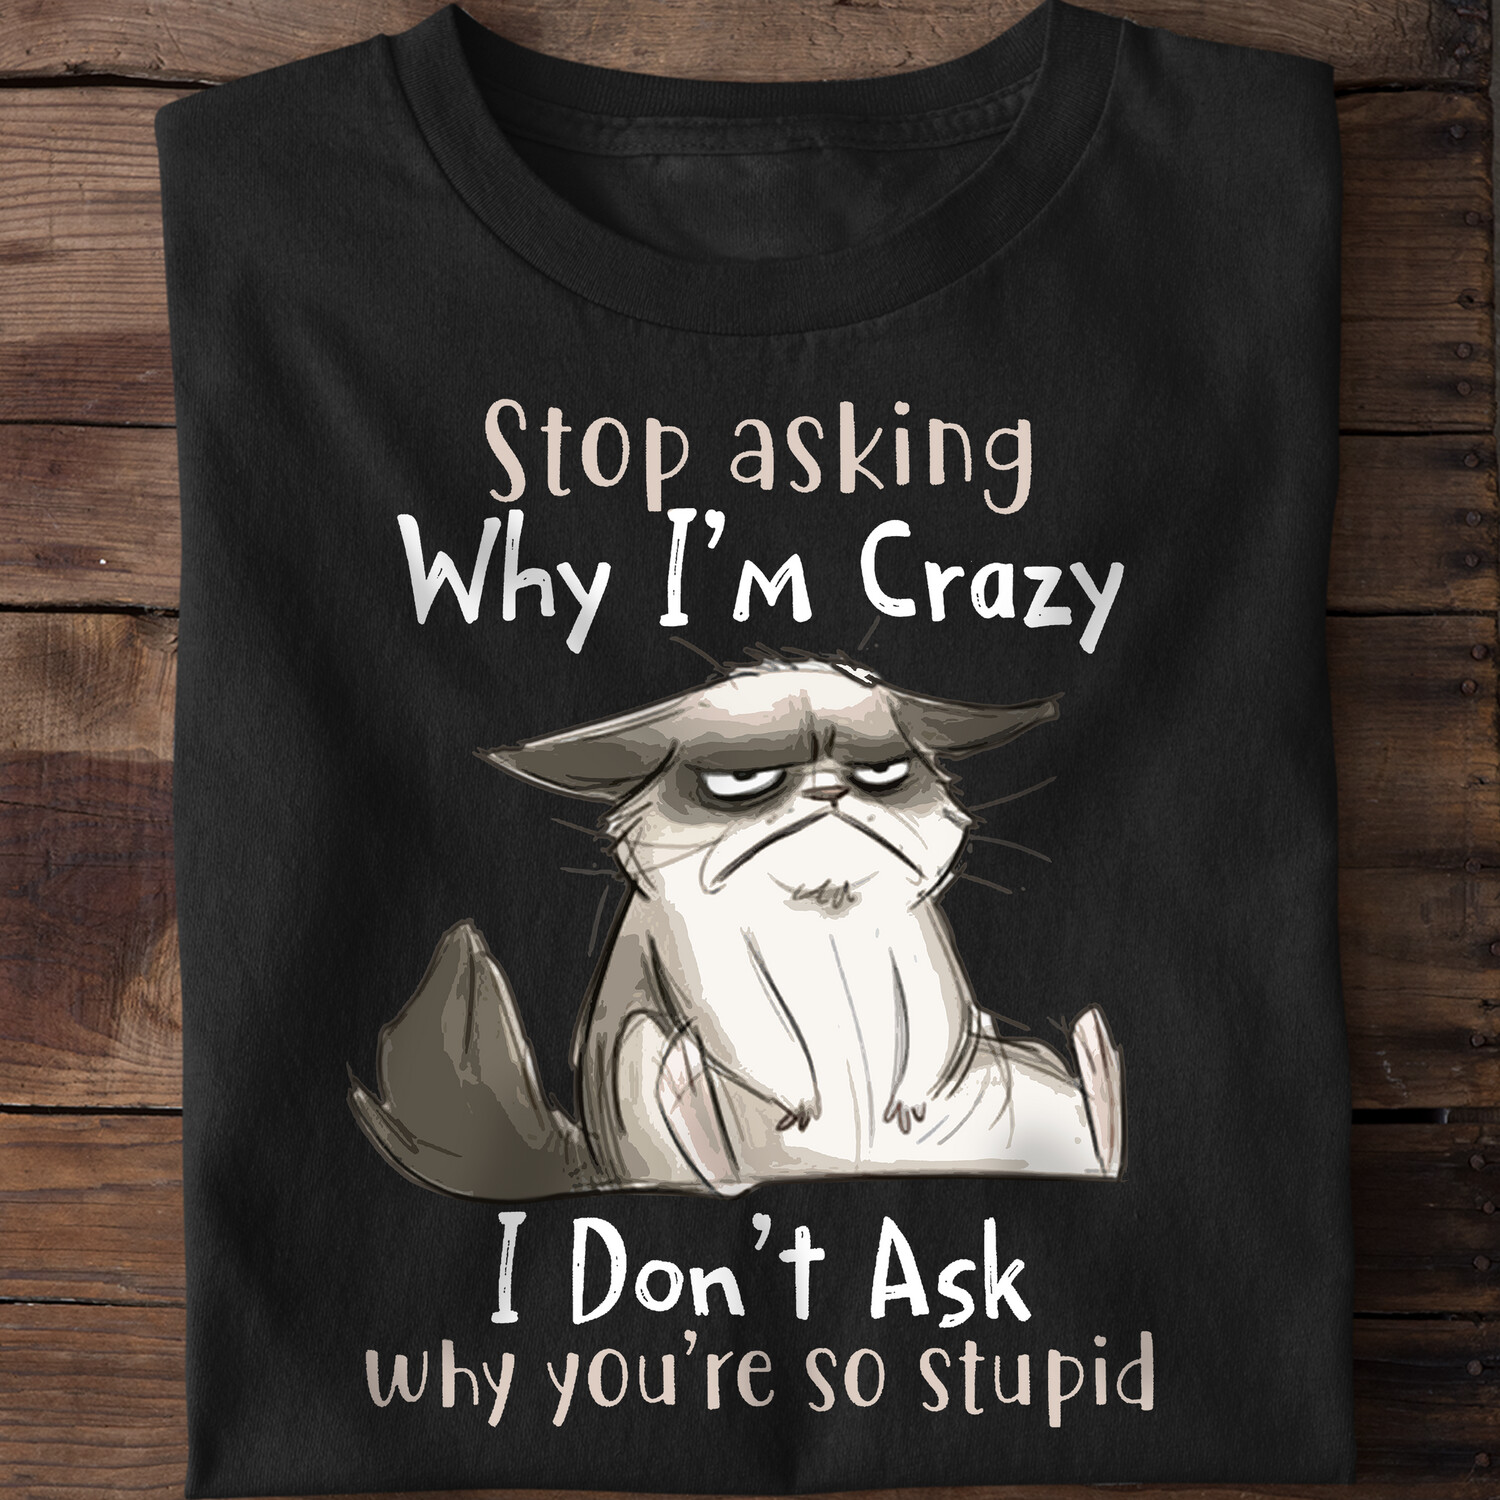 Stop Asking Why I'm Crazy I Don't Ask Why You're So Stupid Shirt